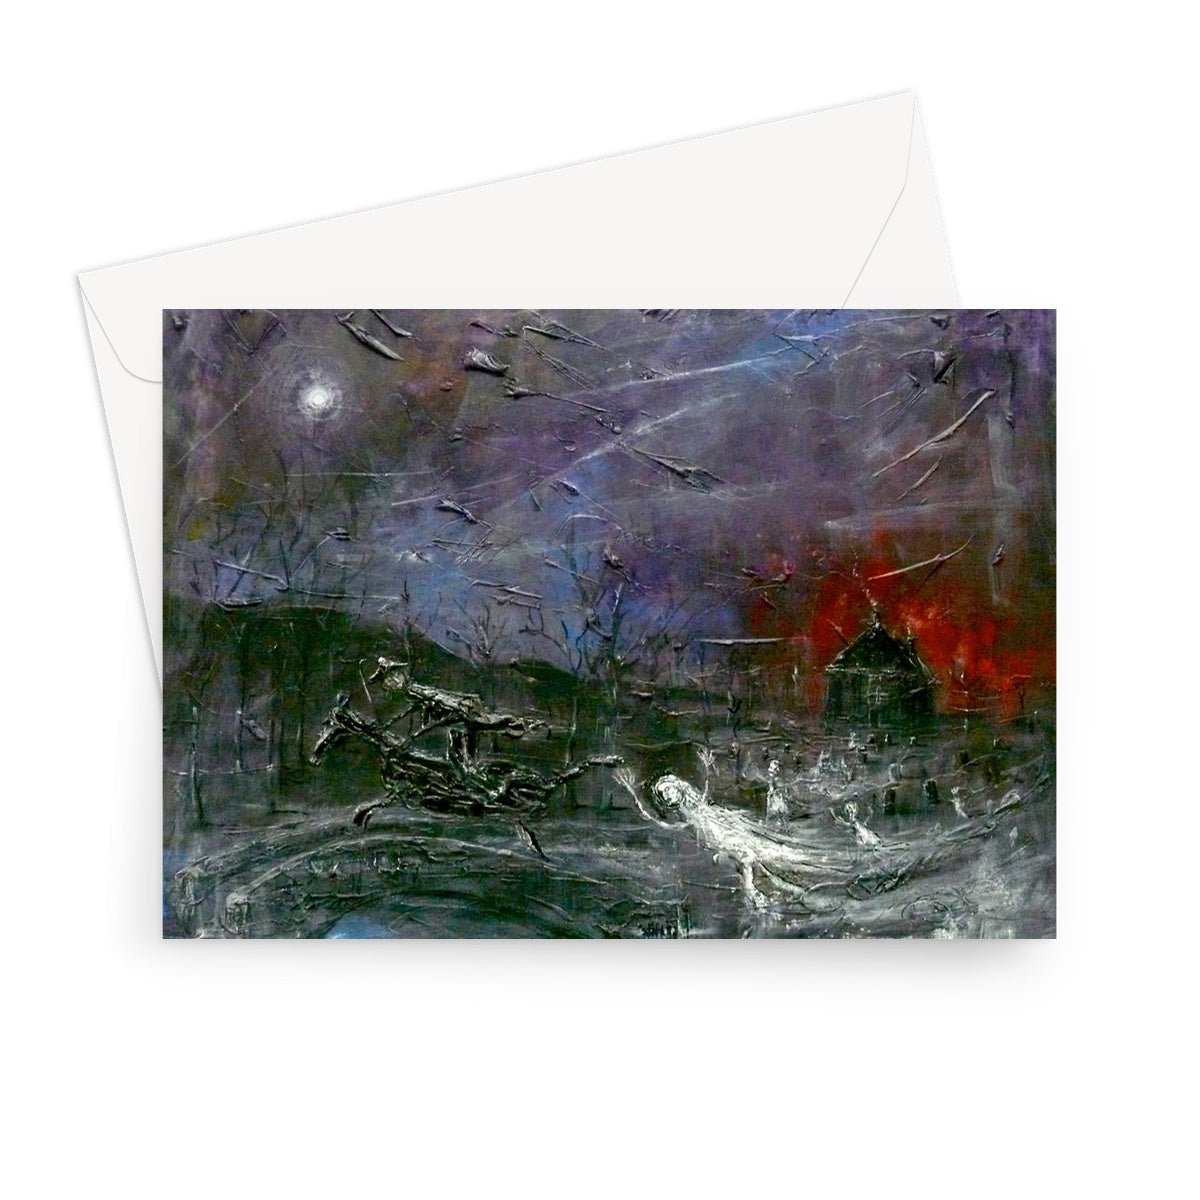 Tam O Shanter Art Gifts Greeting Card-Greetings Cards-Abstract & Impressionistic Art Gallery-7"x5"-10 Cards-Paintings, Prints, Homeware, Art Gifts From Scotland By Scottish Artist Kevin Hunter